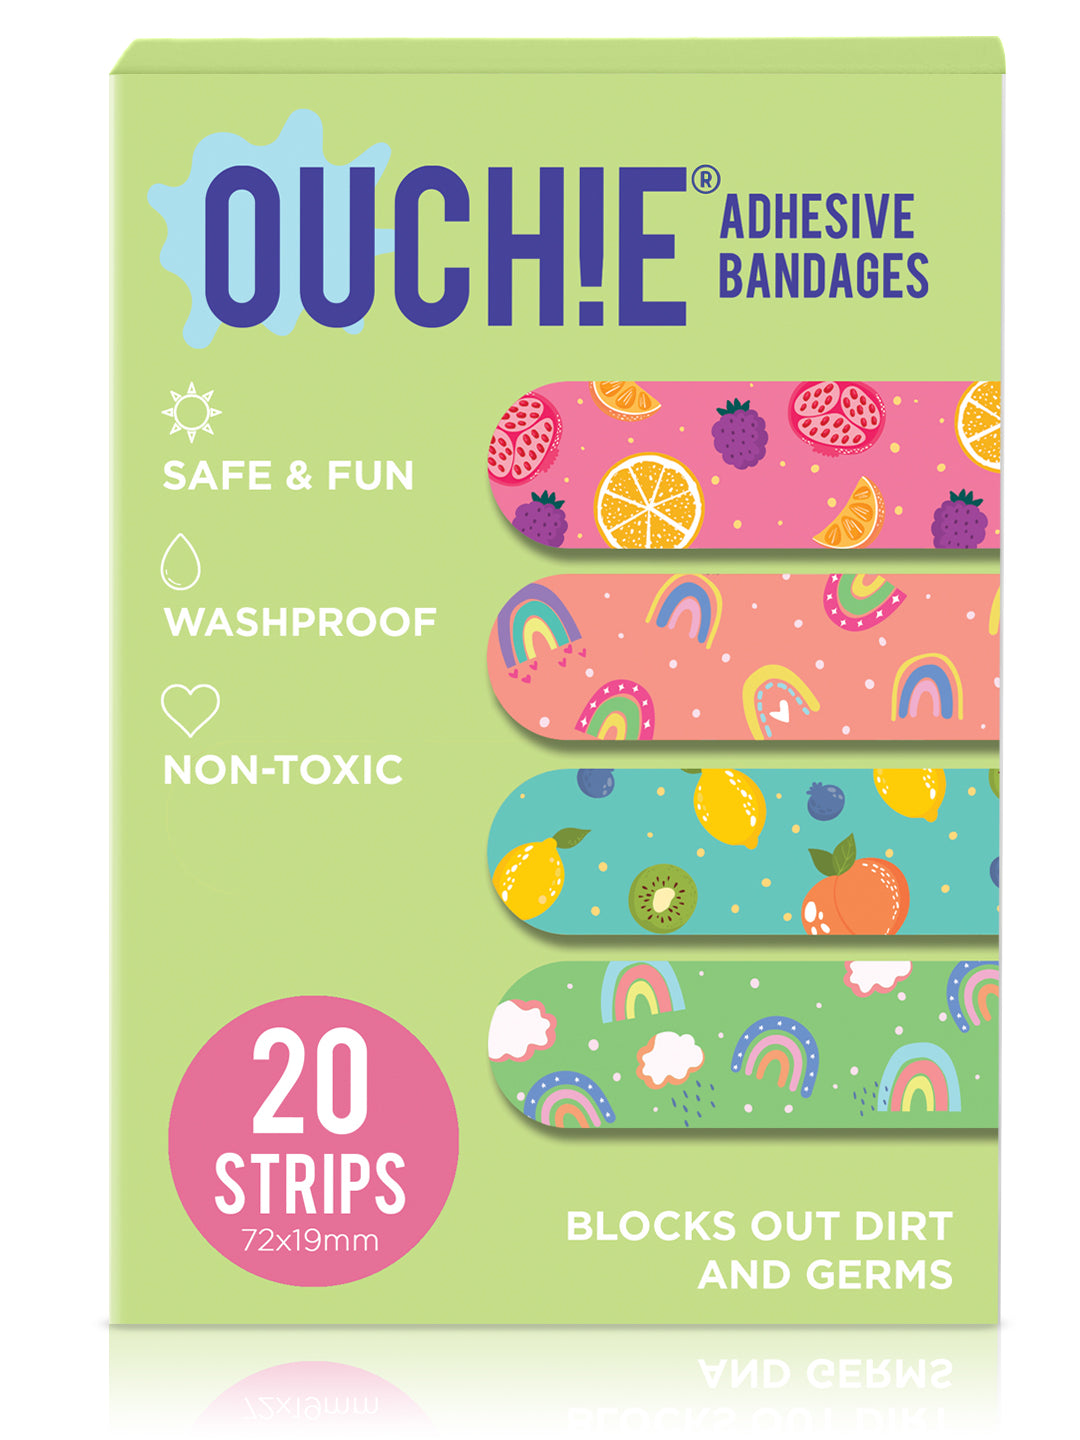 Ouchie Non-Toxic Printed Bandages Triple Combo (60 Pack) - Pink, Lime Green & Lavender